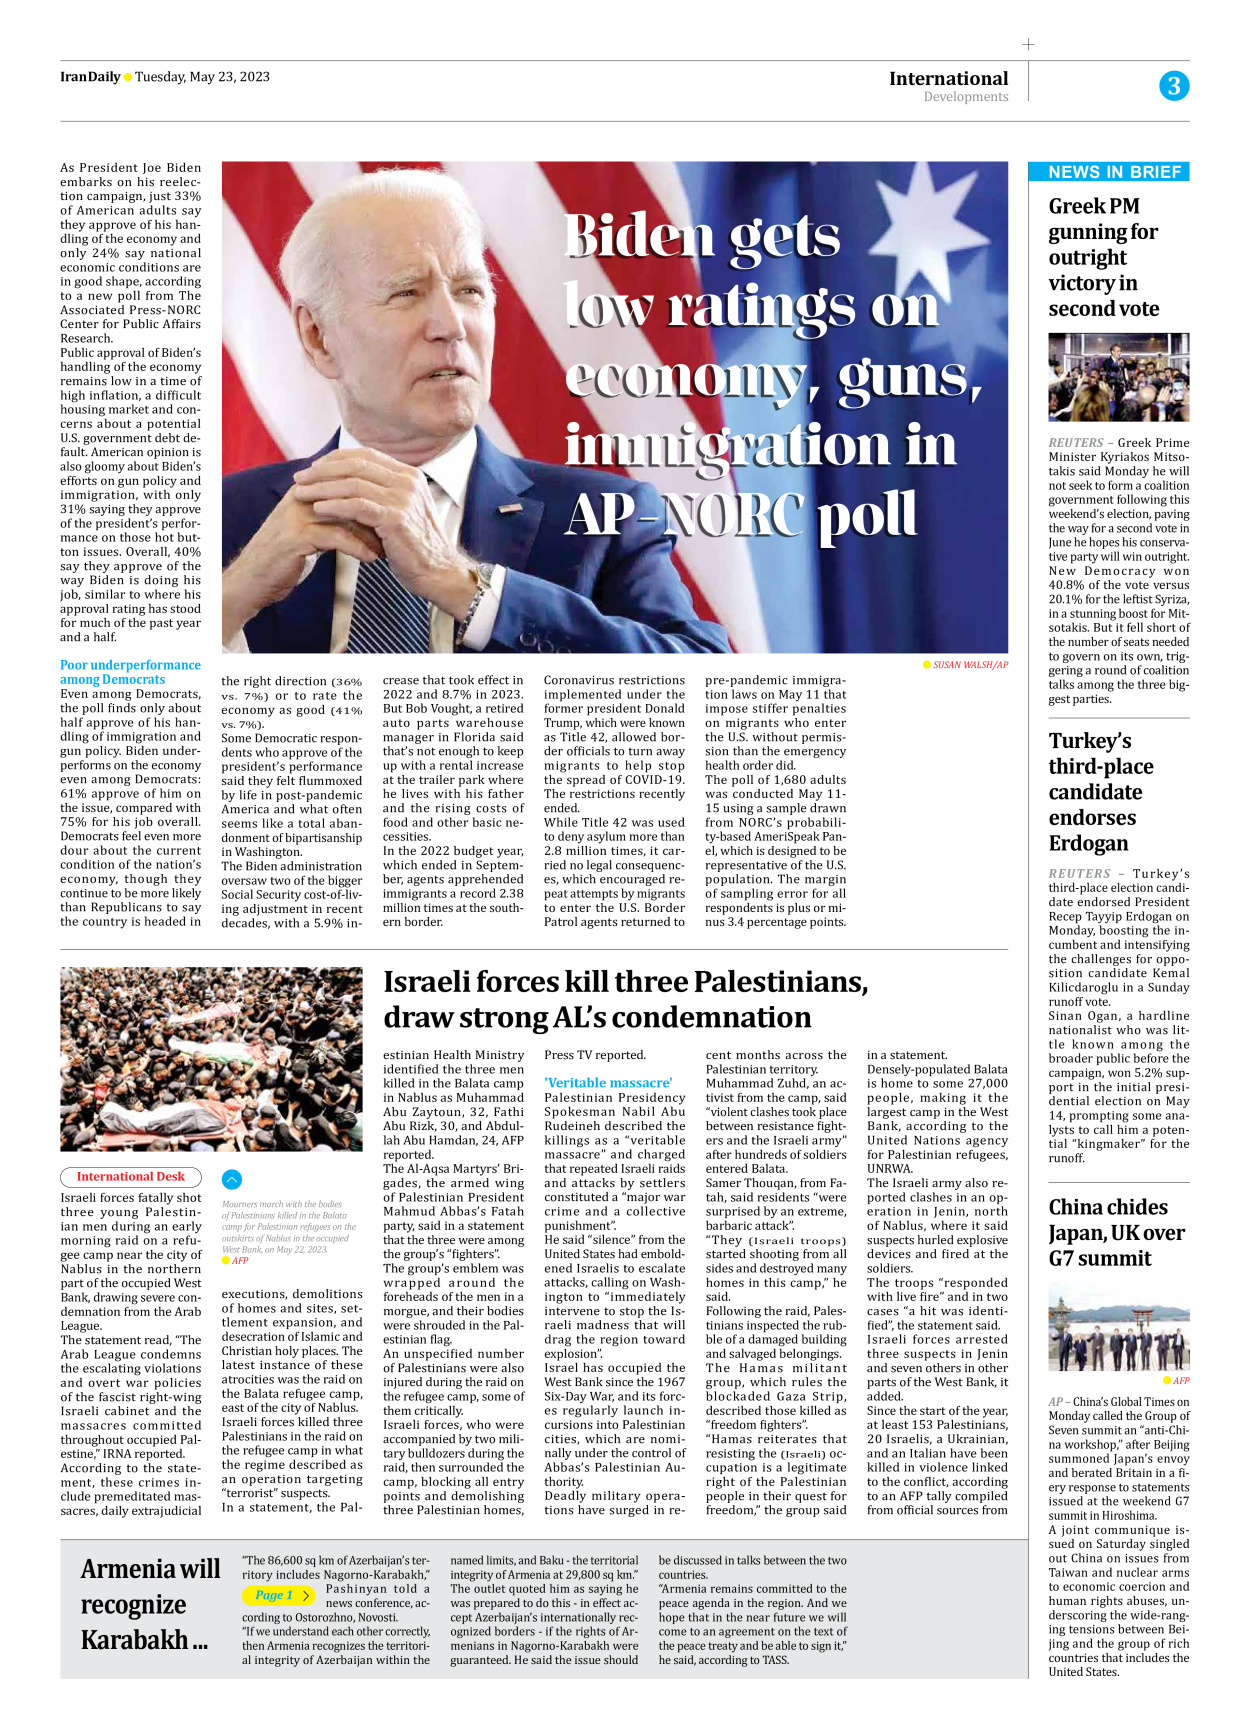 Iran Daily - Number Seven Thousand Two Hundred and Ninety Eight - 23 May 2023 - Page 3